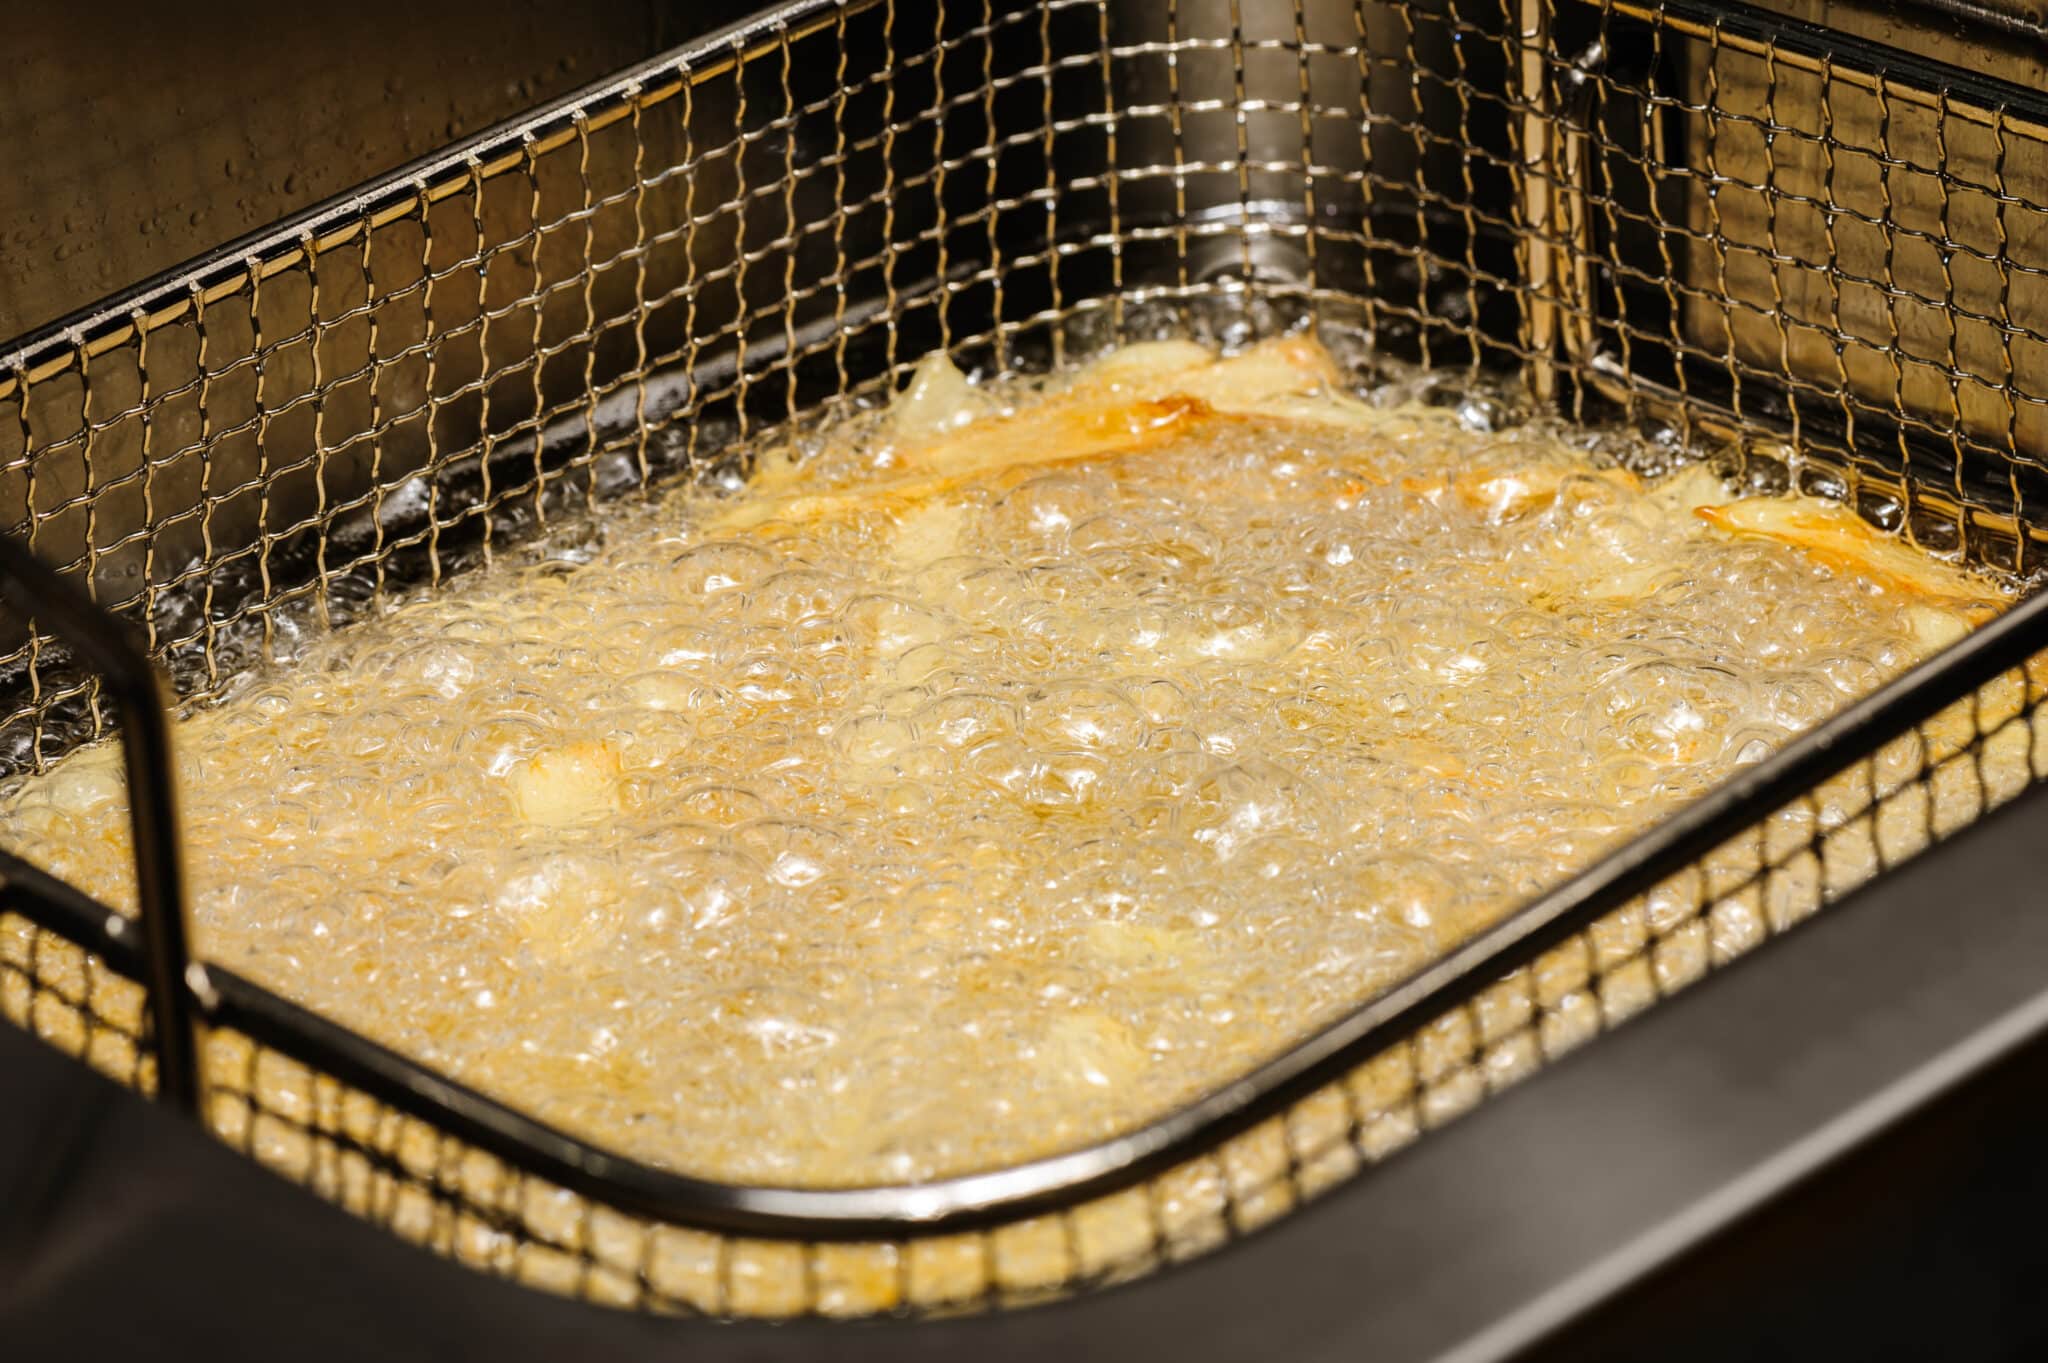 Why You Shouldn’t Boil Water in a Deep Fat Fryer